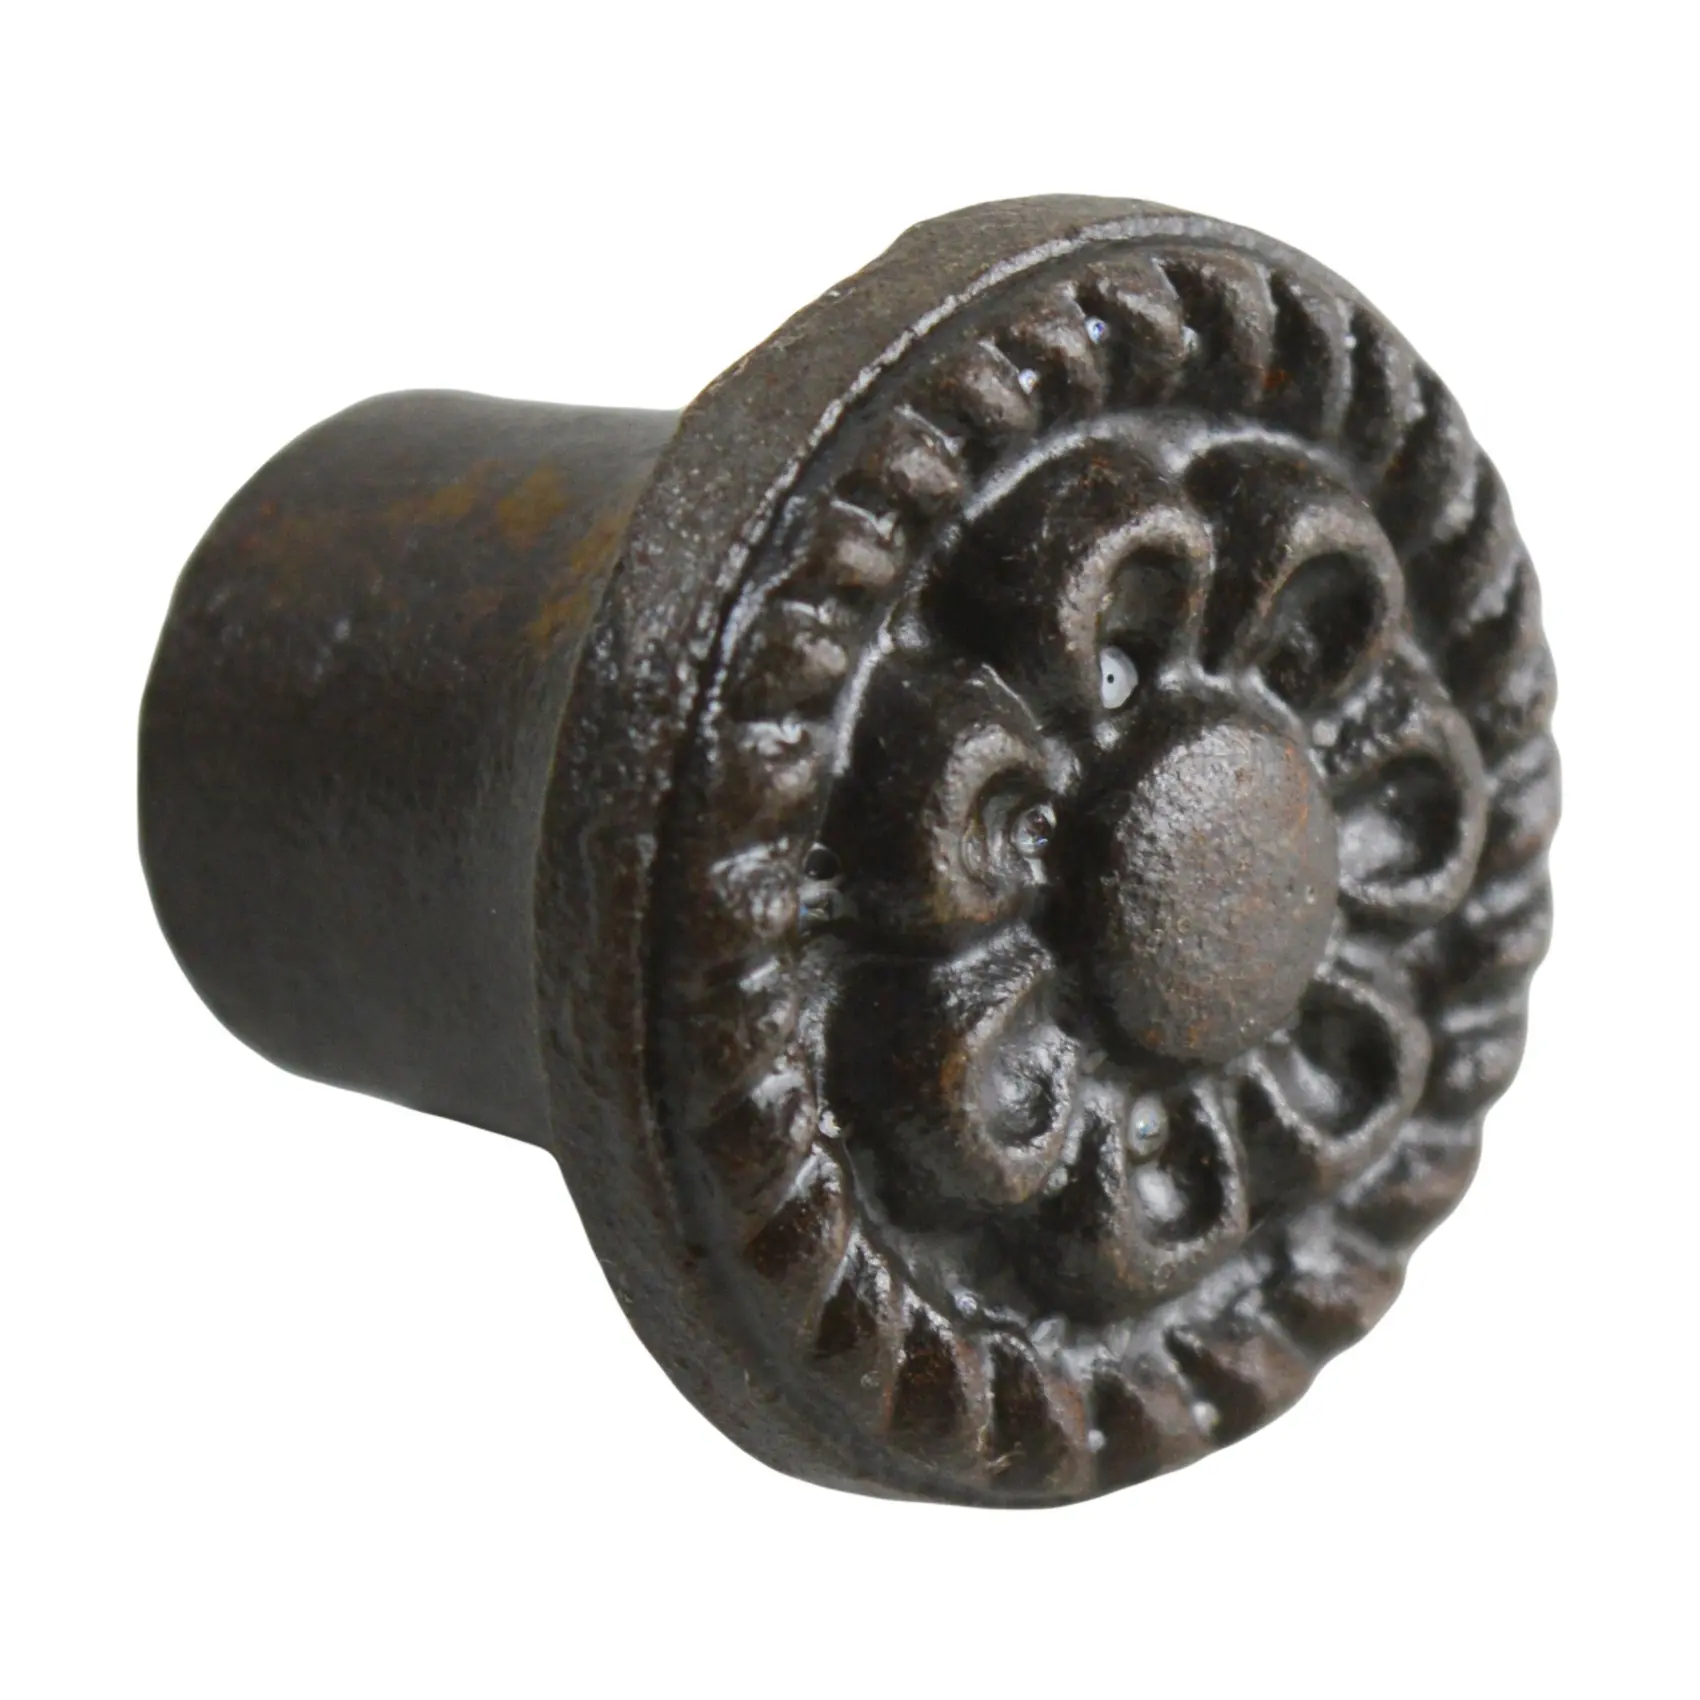 Cheap Small Cabinet Knobs For Home Decor Furniture Decor Metal Cast Iron Design Painted Finishing Drawer Pull Handmade Knobs